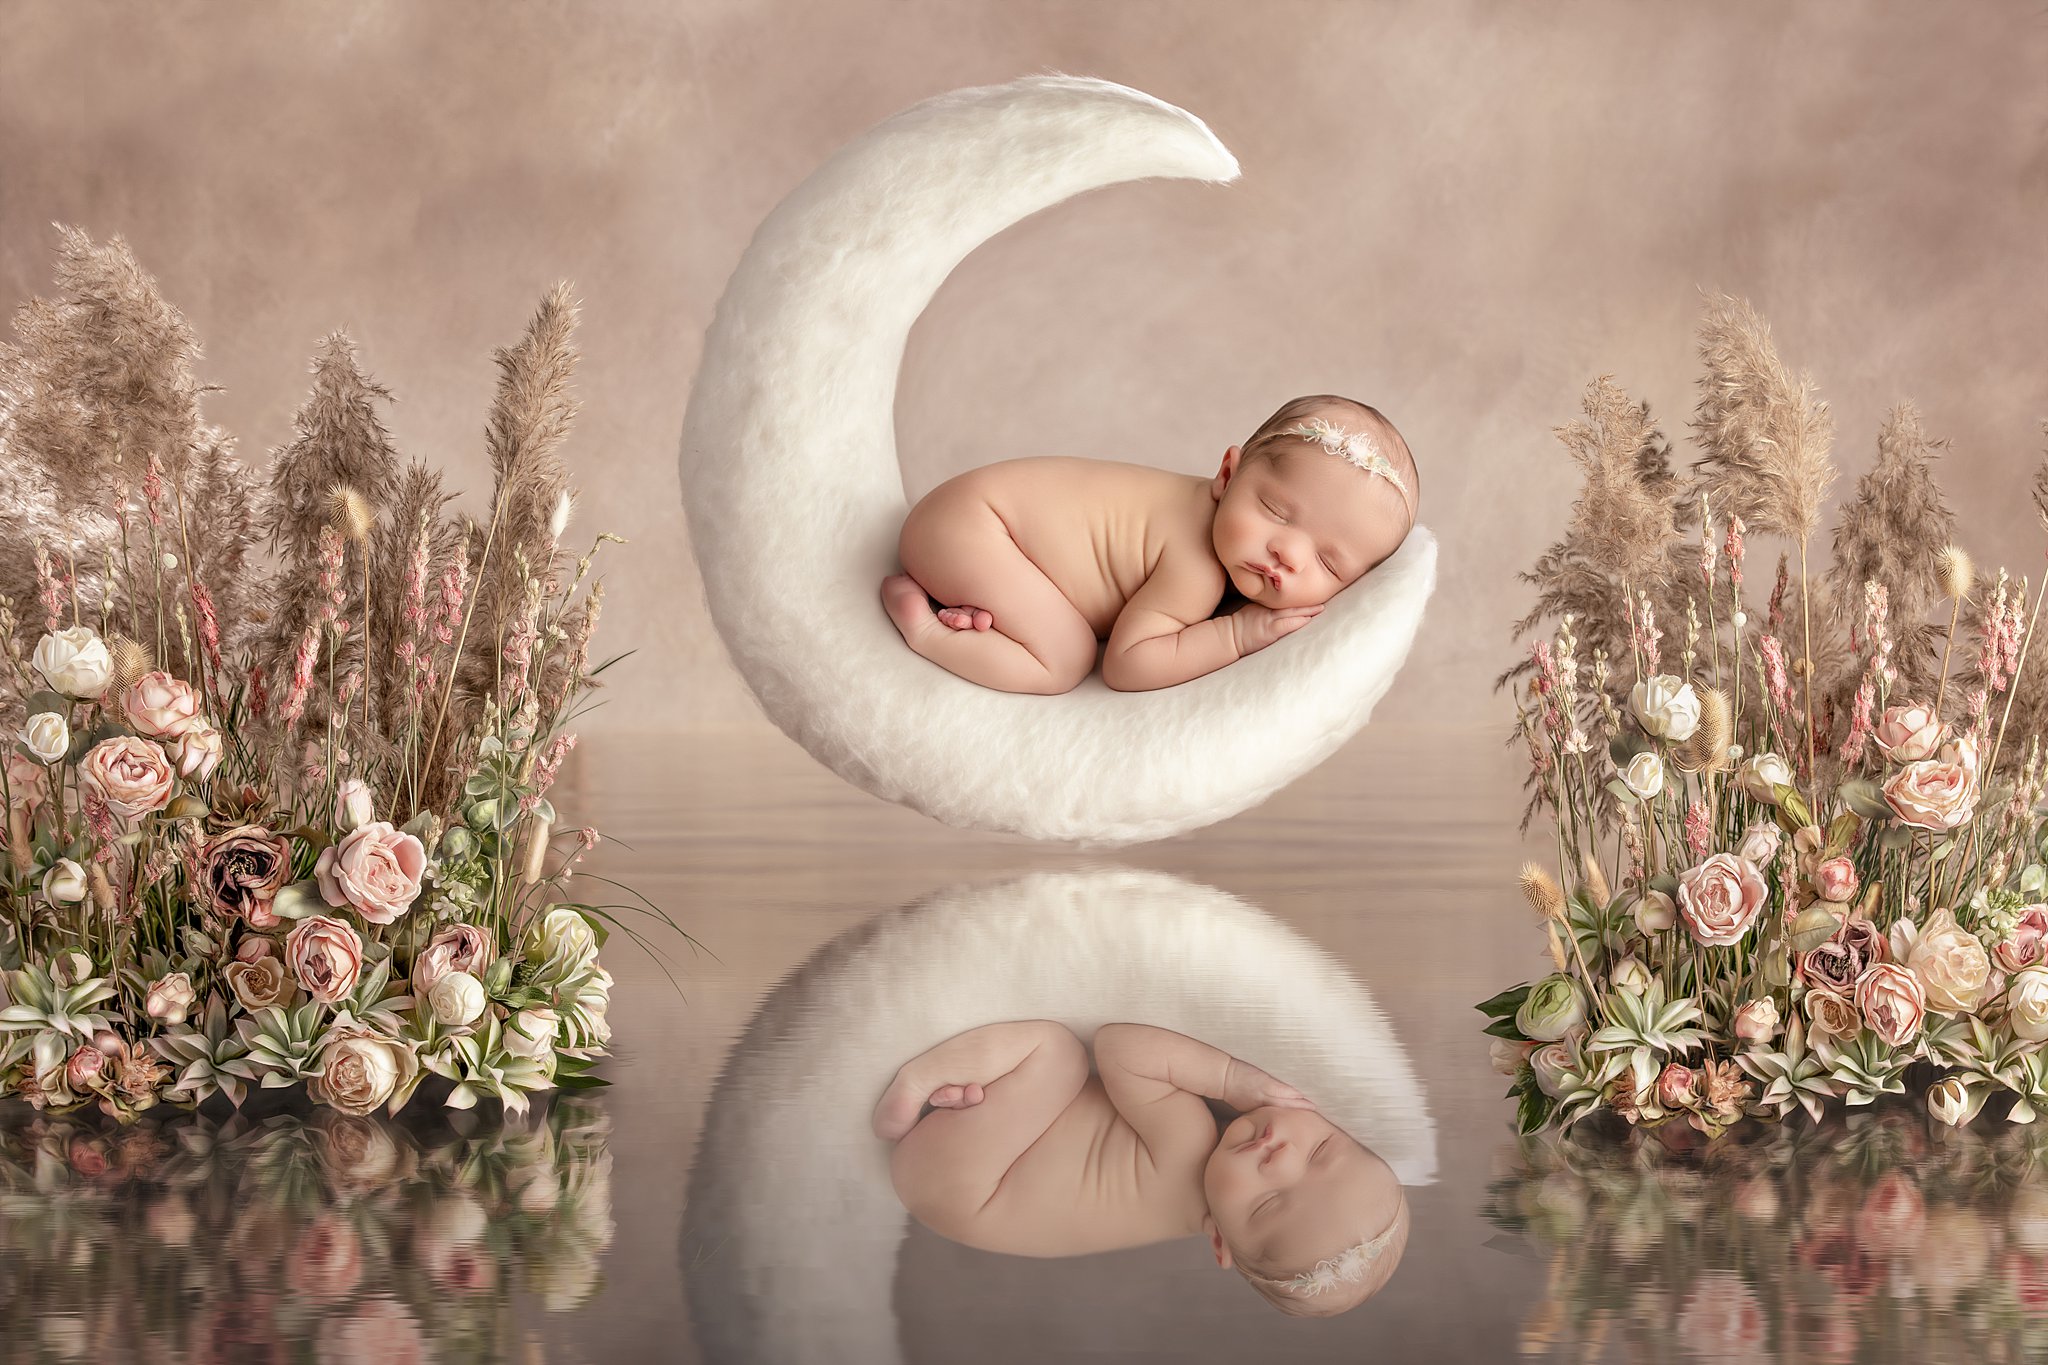 A naked newborn baby sleeps on a soft moon surrounded by flowers over water ellifox